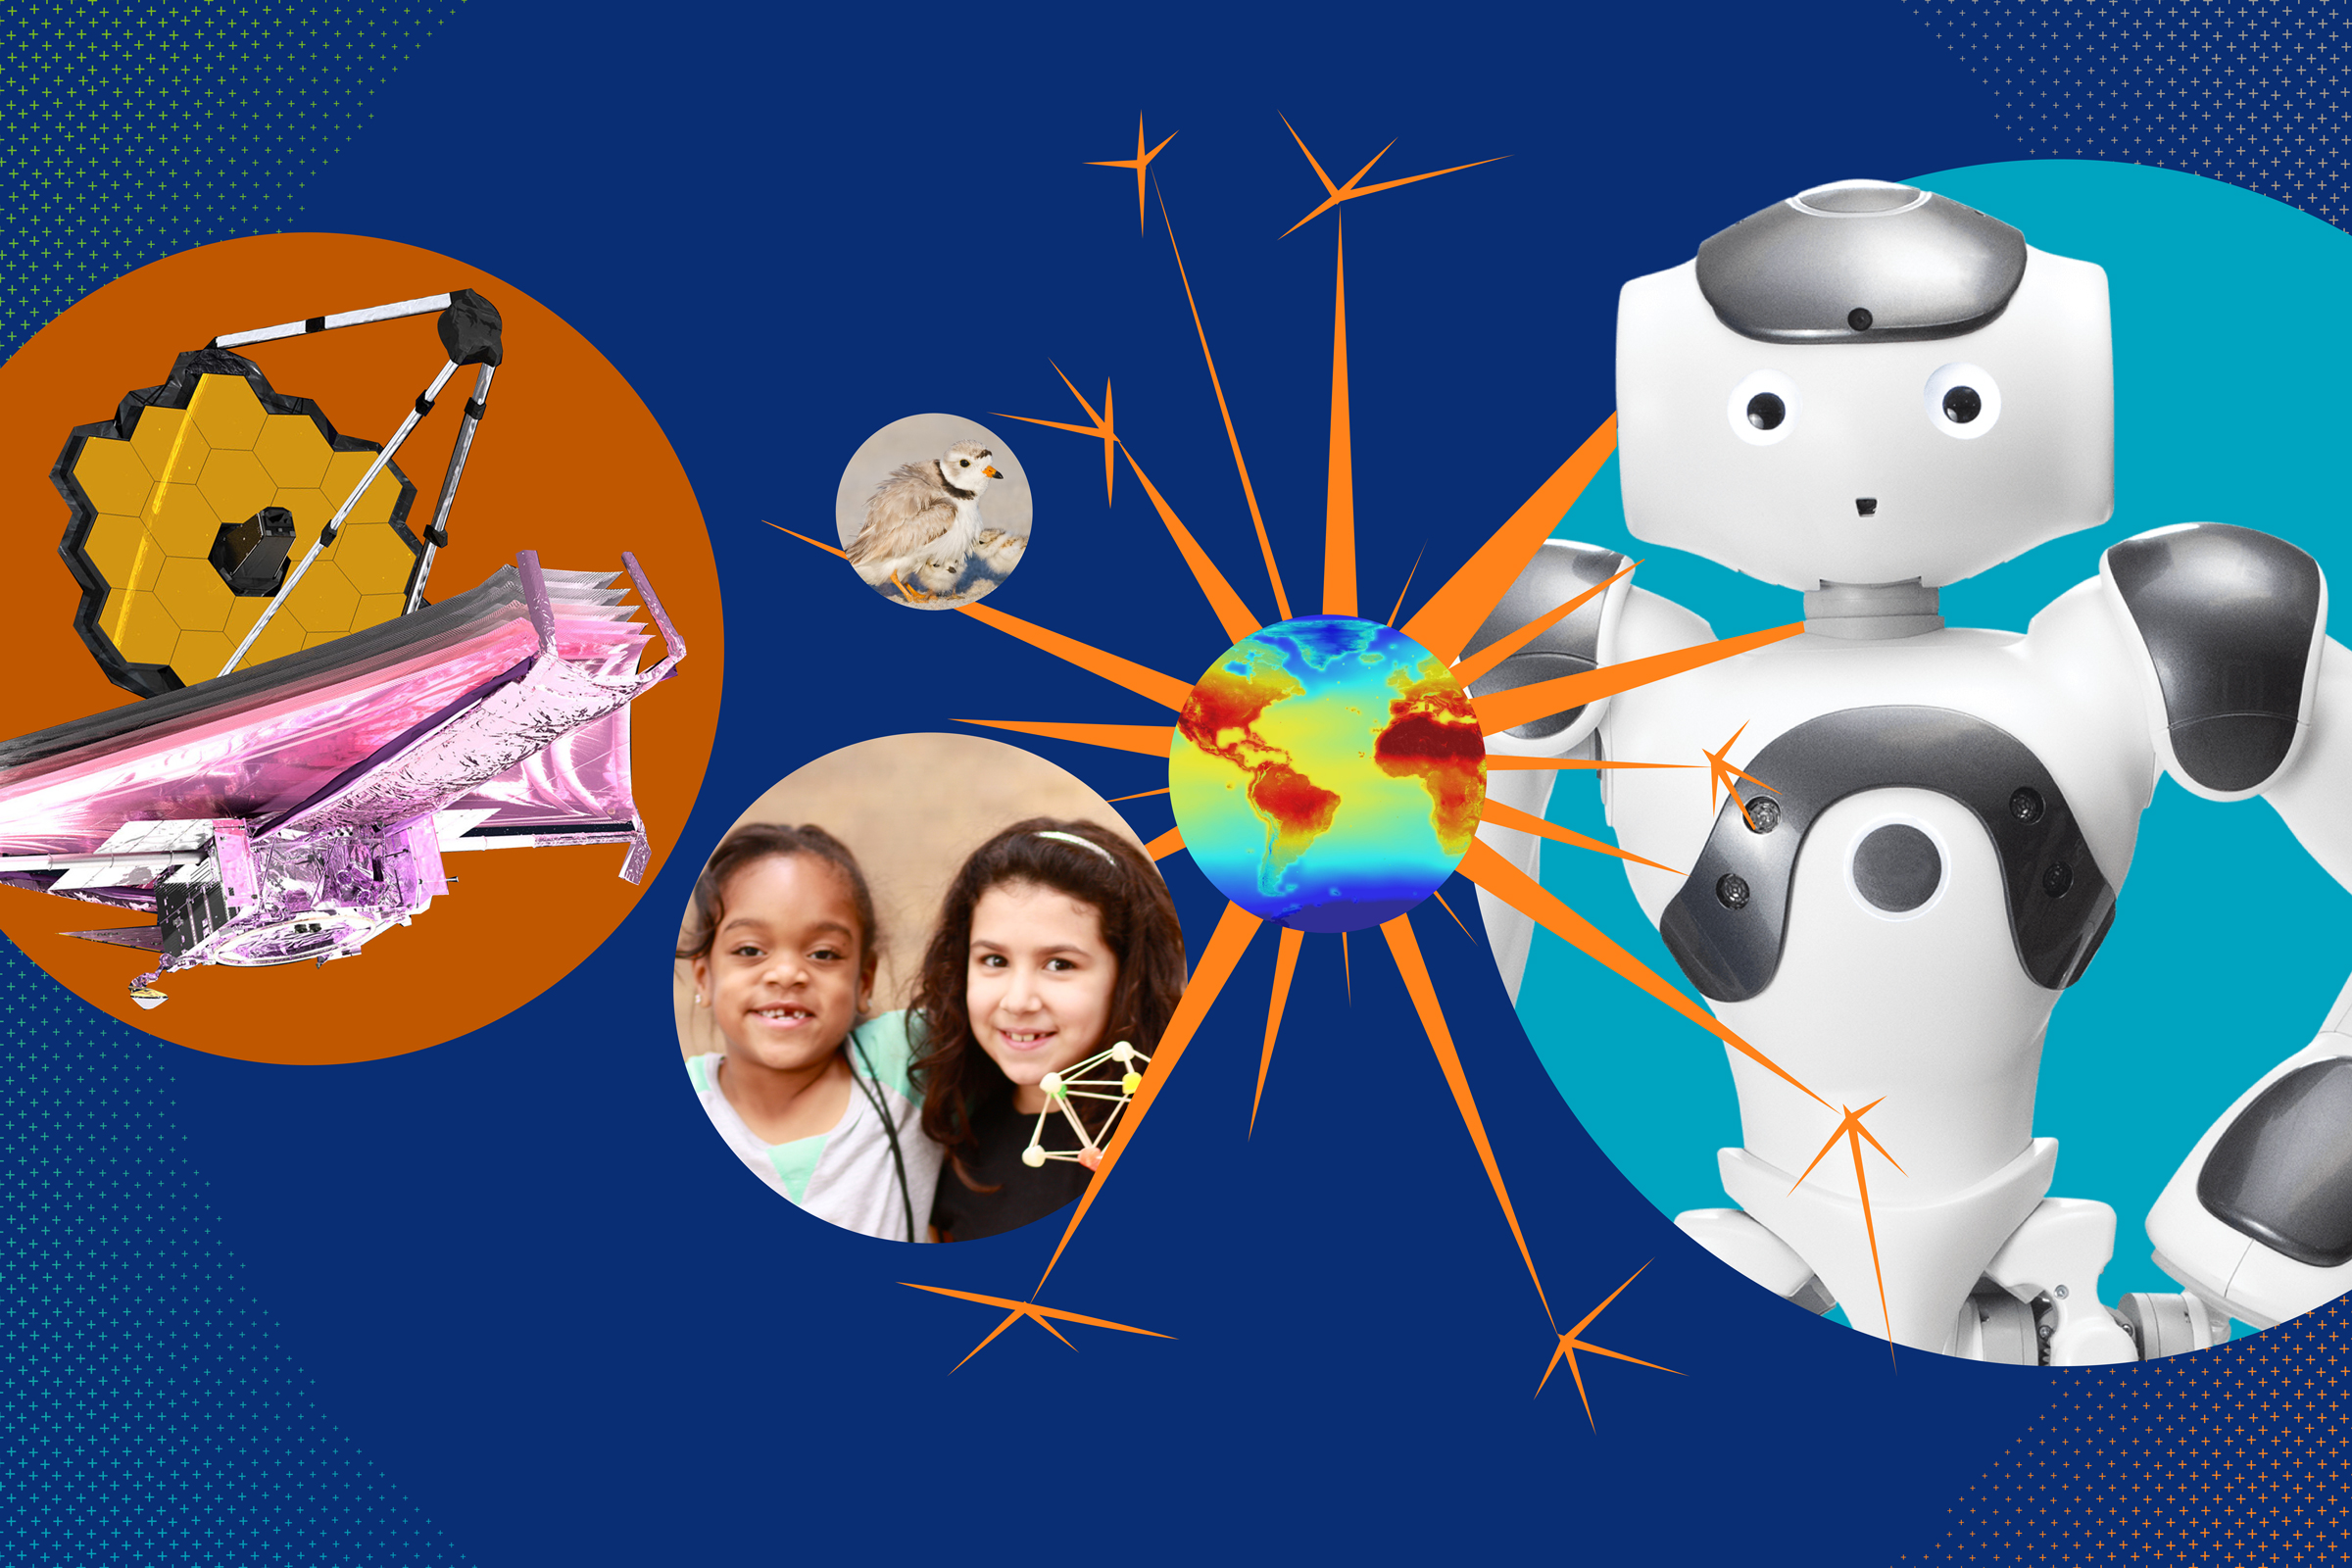 A space telescope, two girls, a planet, a bird and a robot represent science festival events